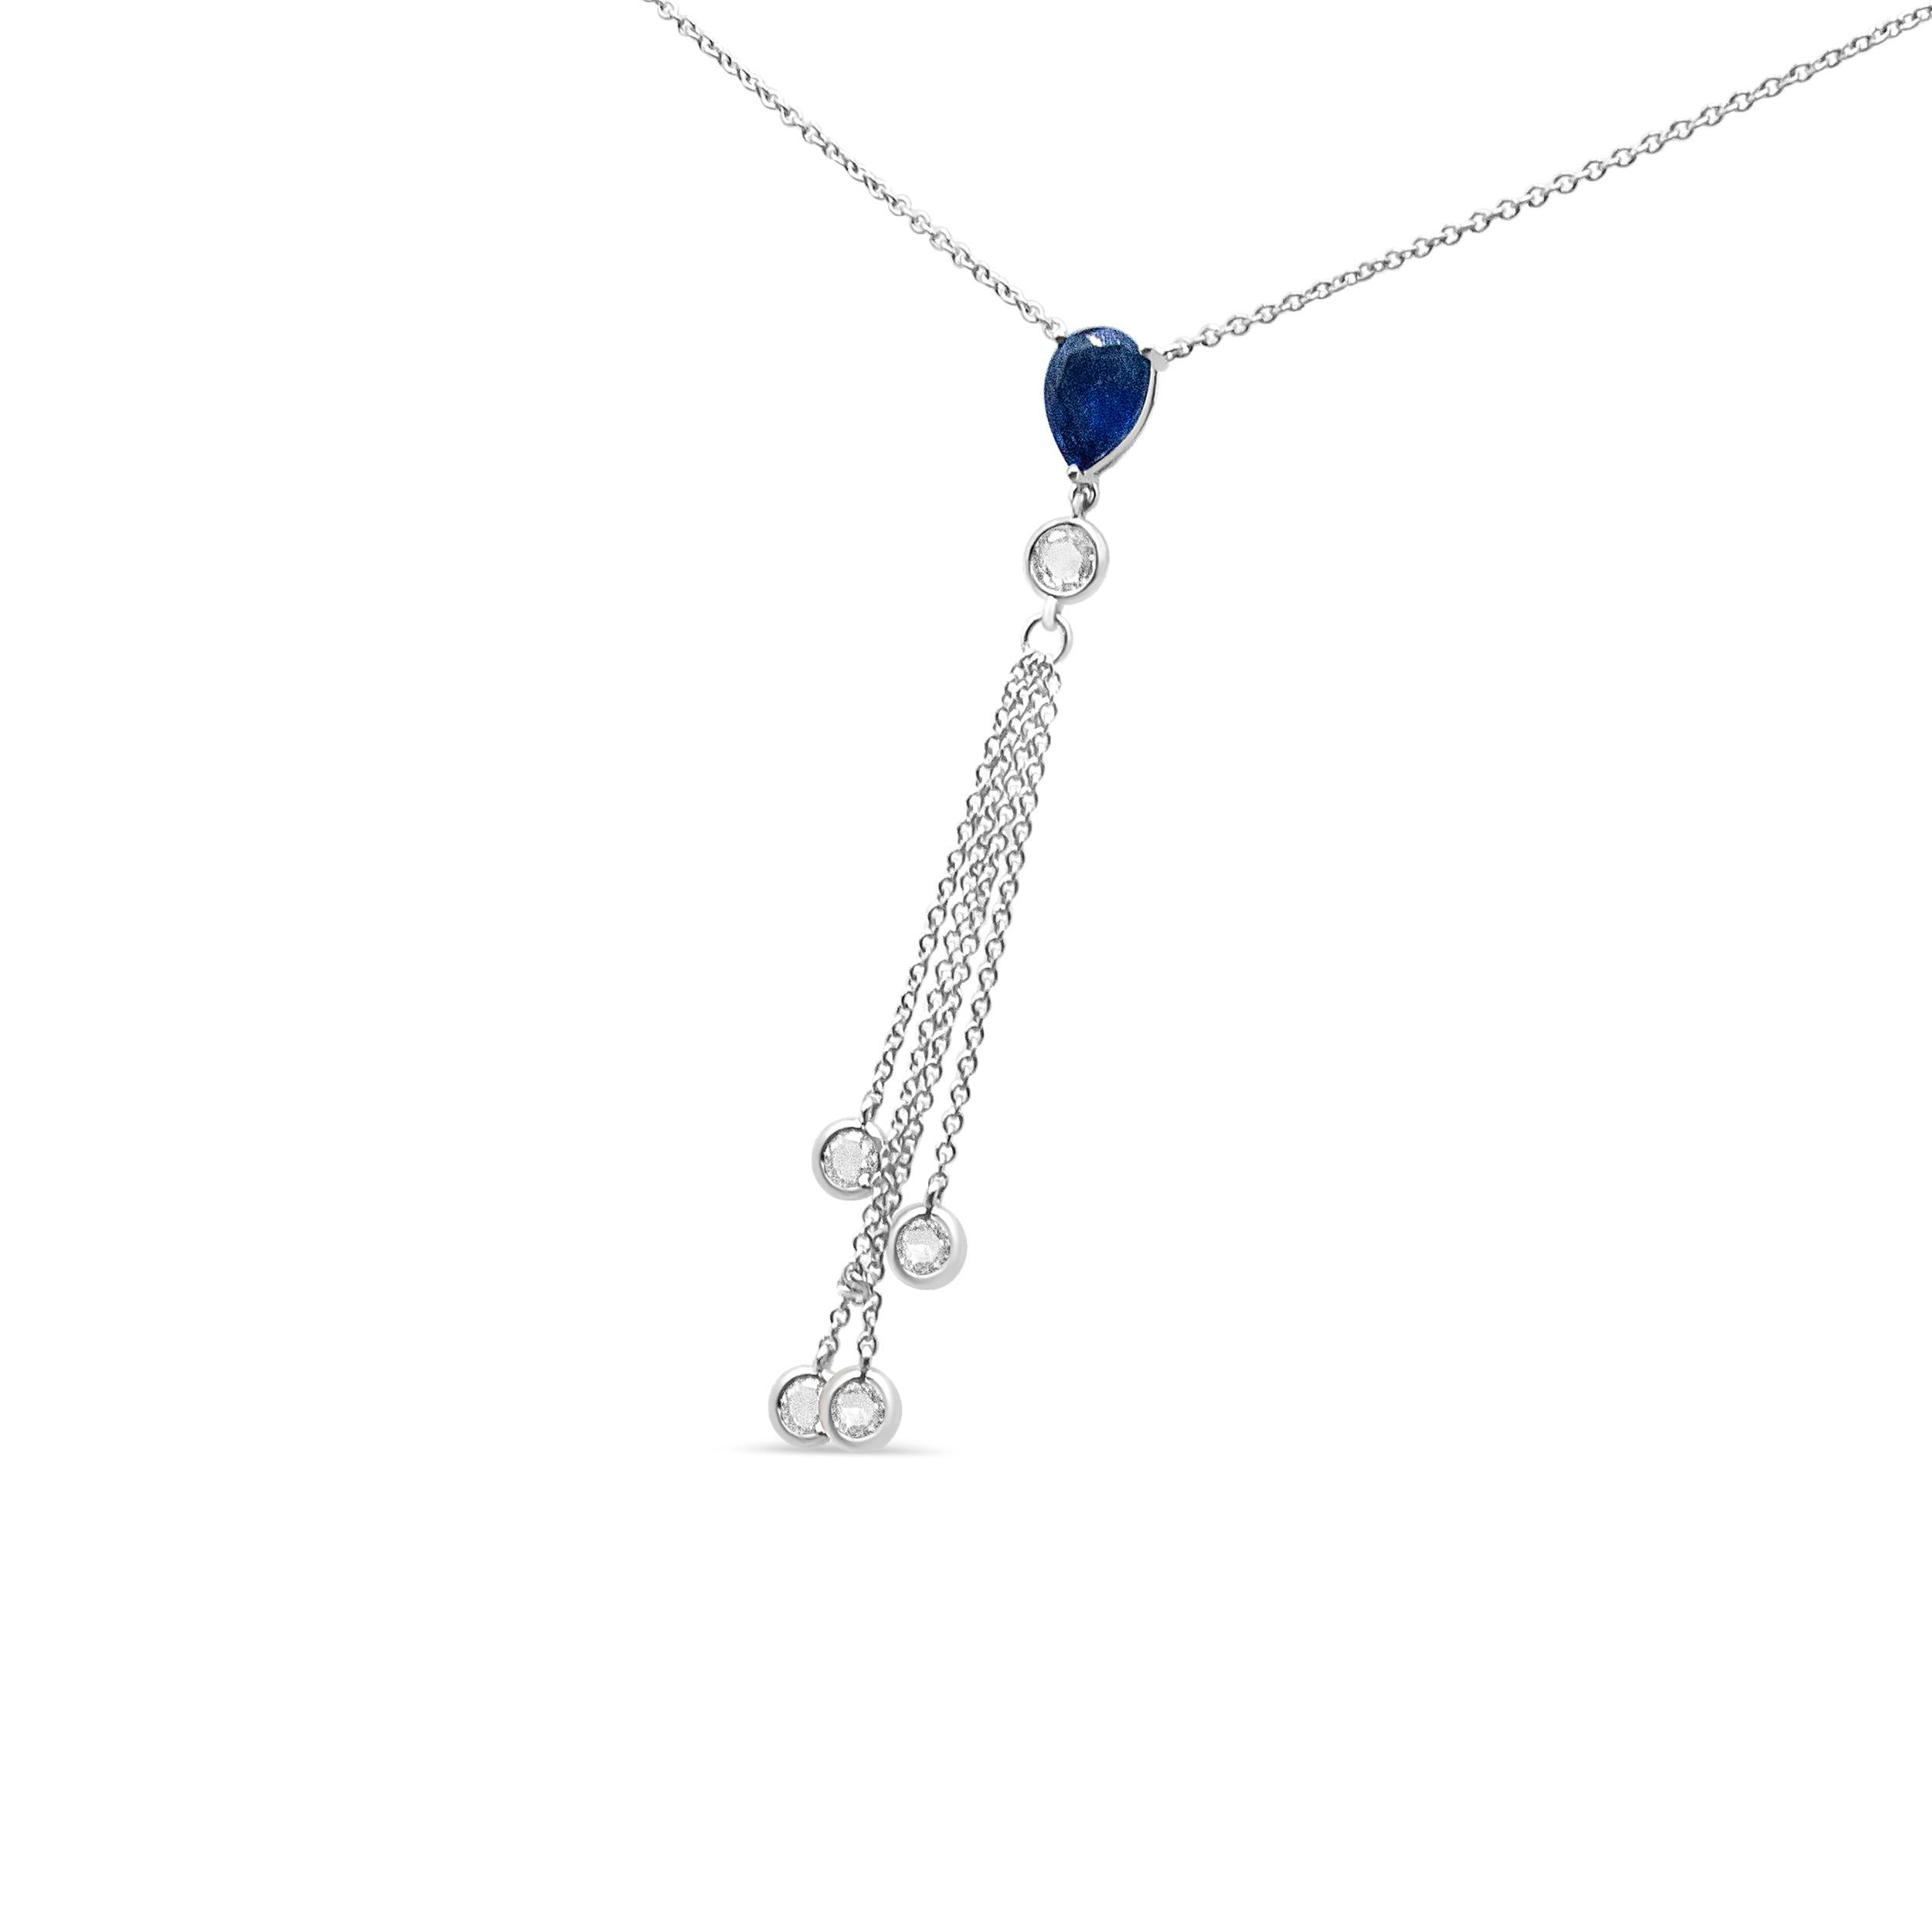 This diamond and gemstone necklace radiates elegance with sophistication crafted of genuine 18k white gold. A natural 8x6mm pear-shaped color-treated blue sapphire emits a brilliant sparkle with a single bezel-set round diamond below. A waterfall of